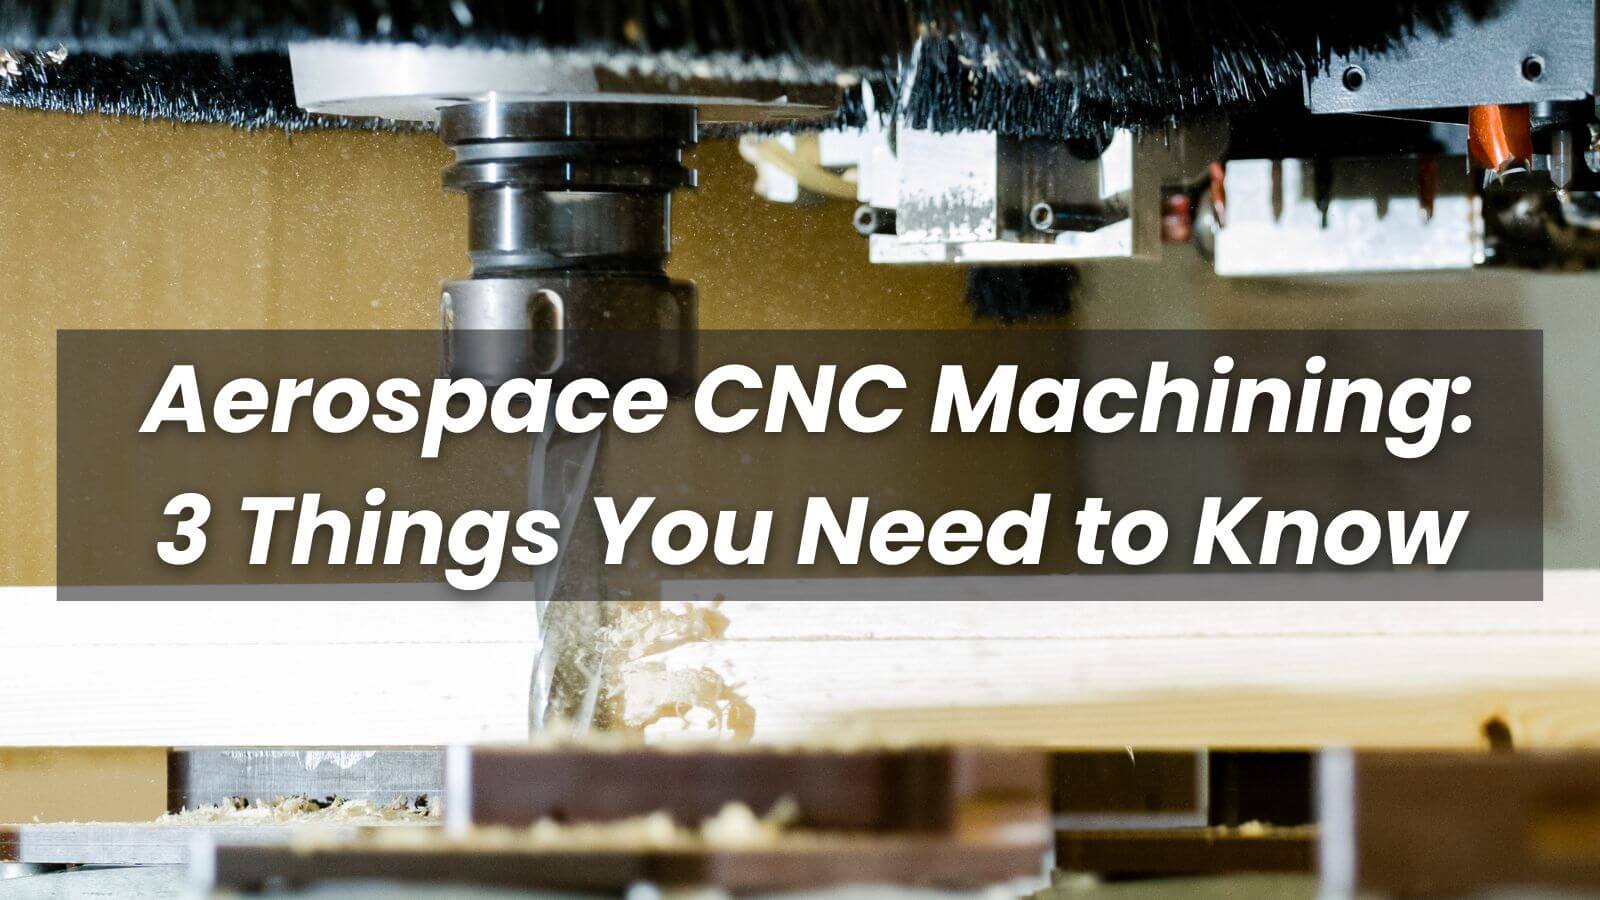 Aerospace CNC Machining: 3 Things You Need to Know